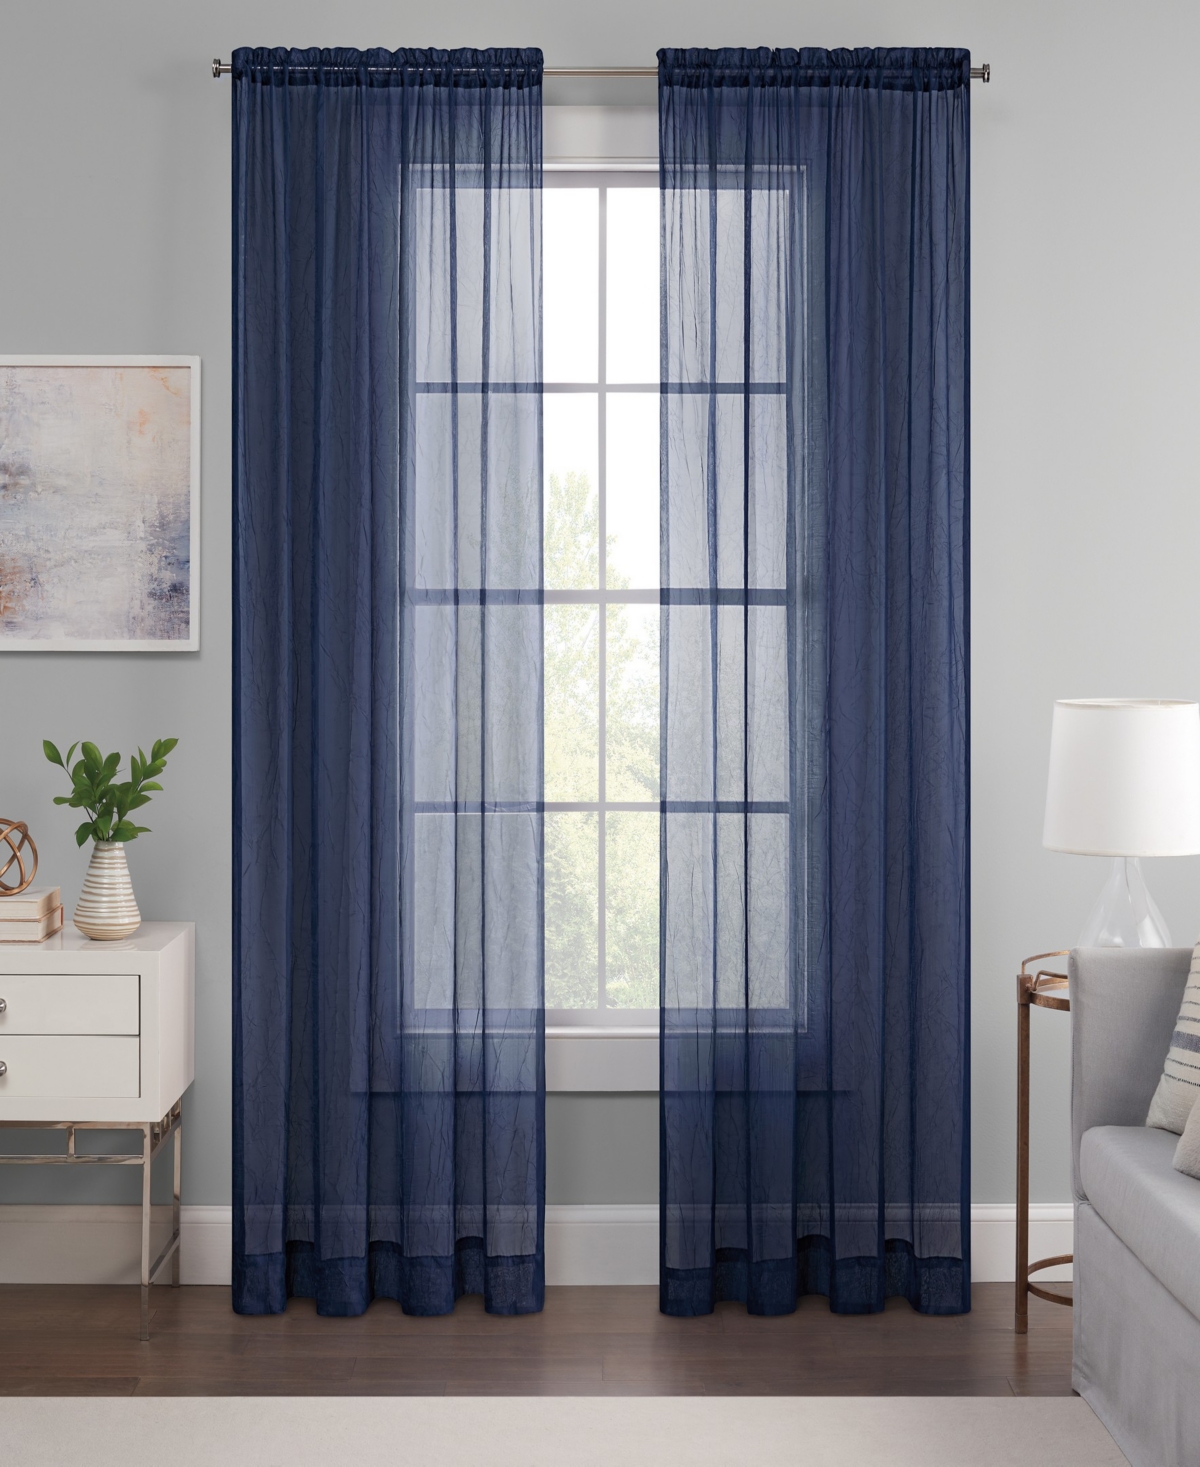 Eclipse Emina Crushed Sheer Voile Rod Pocket Curtain Panel, 52" X 95" In Navy